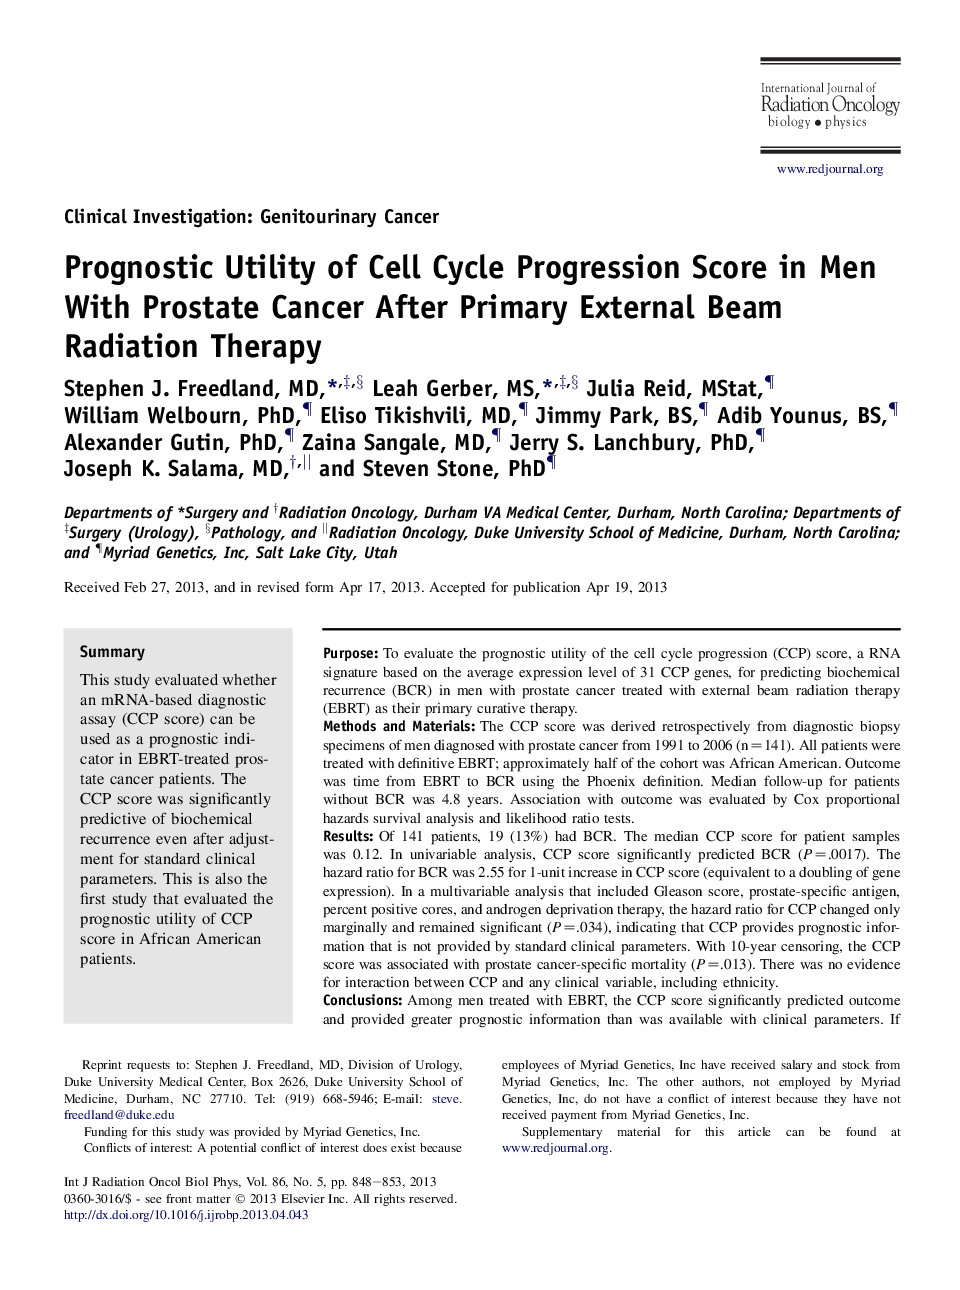 Prognostic Utility of Cell Cycle Progression Score in Men With Prostate Cancer After Primary External Beam Radiation Therapy